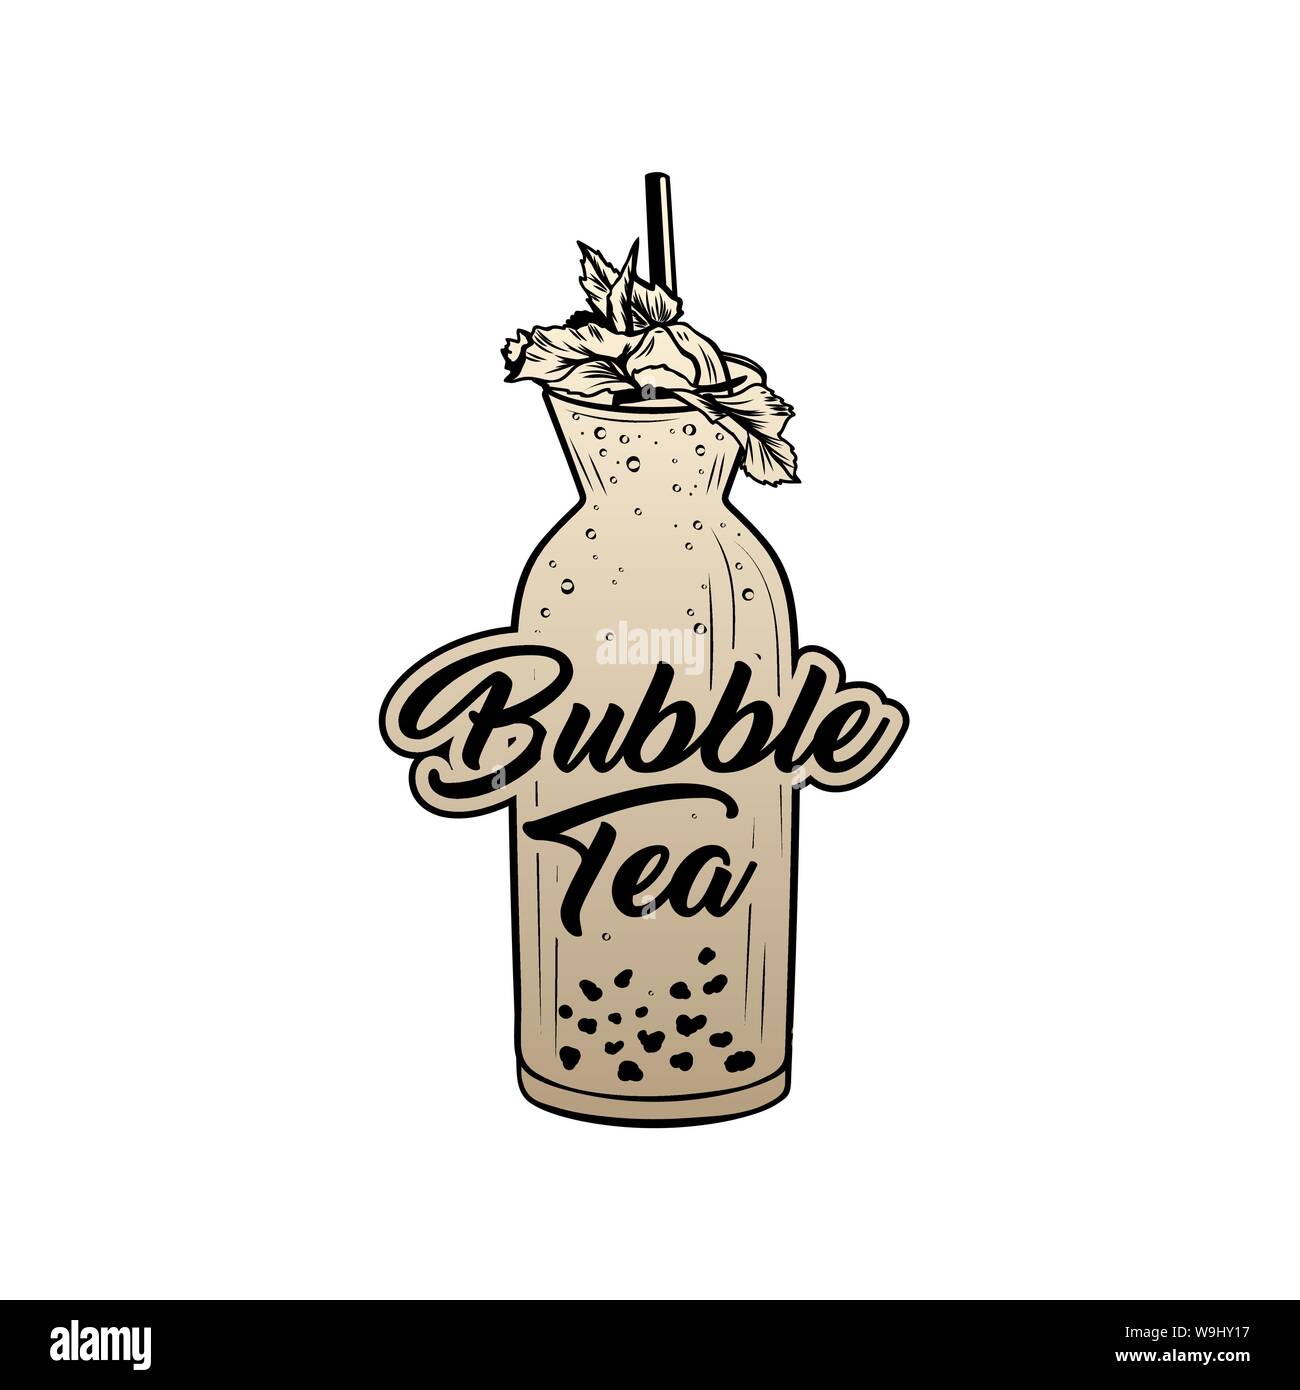 Bubble Tea Golden Sticker With Lettering Vector Illustration Delicious Summer Refreshment Taiwan Herbal Drink Cocktail Drawing With Lettering For Logo Fresh Beverage With Mint Leaves And Bubbles Stock Vector Image Art